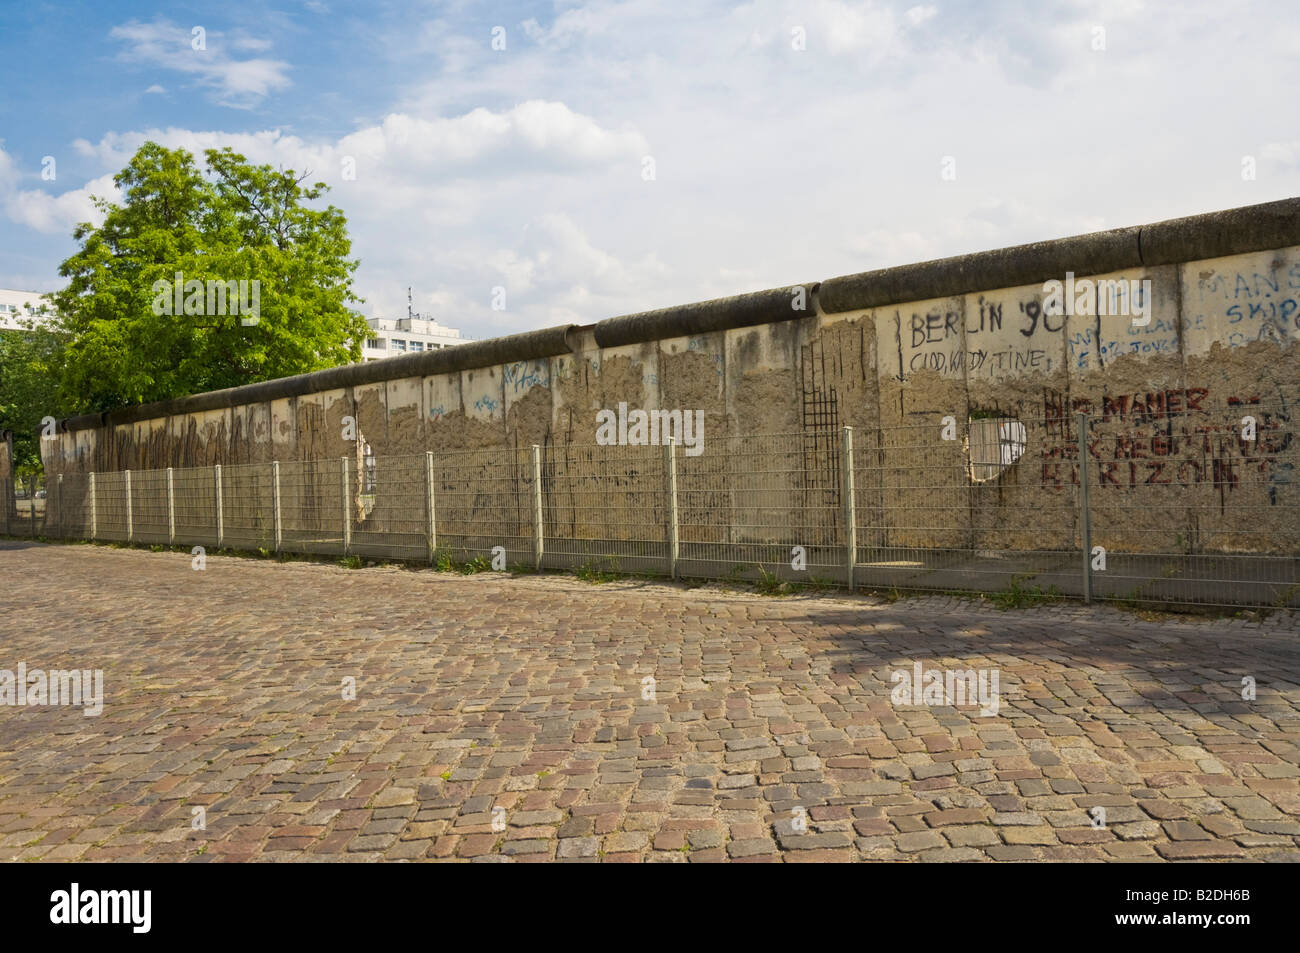 Remains of the Berlin wall near Checkpoint Charlie Niederkirchner strasse Berlin city centre Germany EU Europe Stock Photo